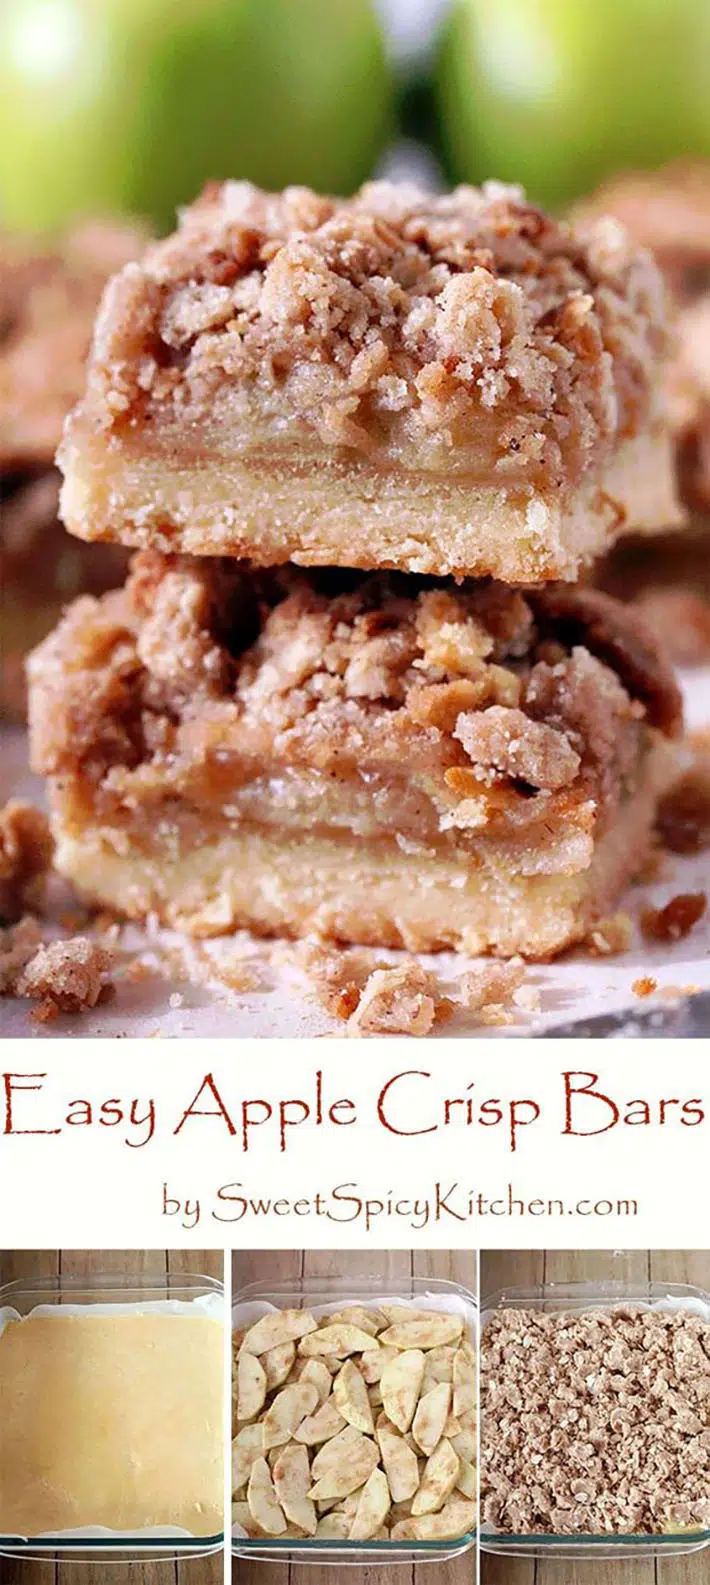 These Easy Apple Crisp Bars have a shortbread layer made of: flour, butter, sugar, light brown sugar, vanilla extract and salt. The juicy part in the middle consists of: apples, sugar, light brown sugar, flour, cinnamon and nutmeg. Crisp topping is made of flour, oats, light brown sugar, butter, cinnamon and salt.